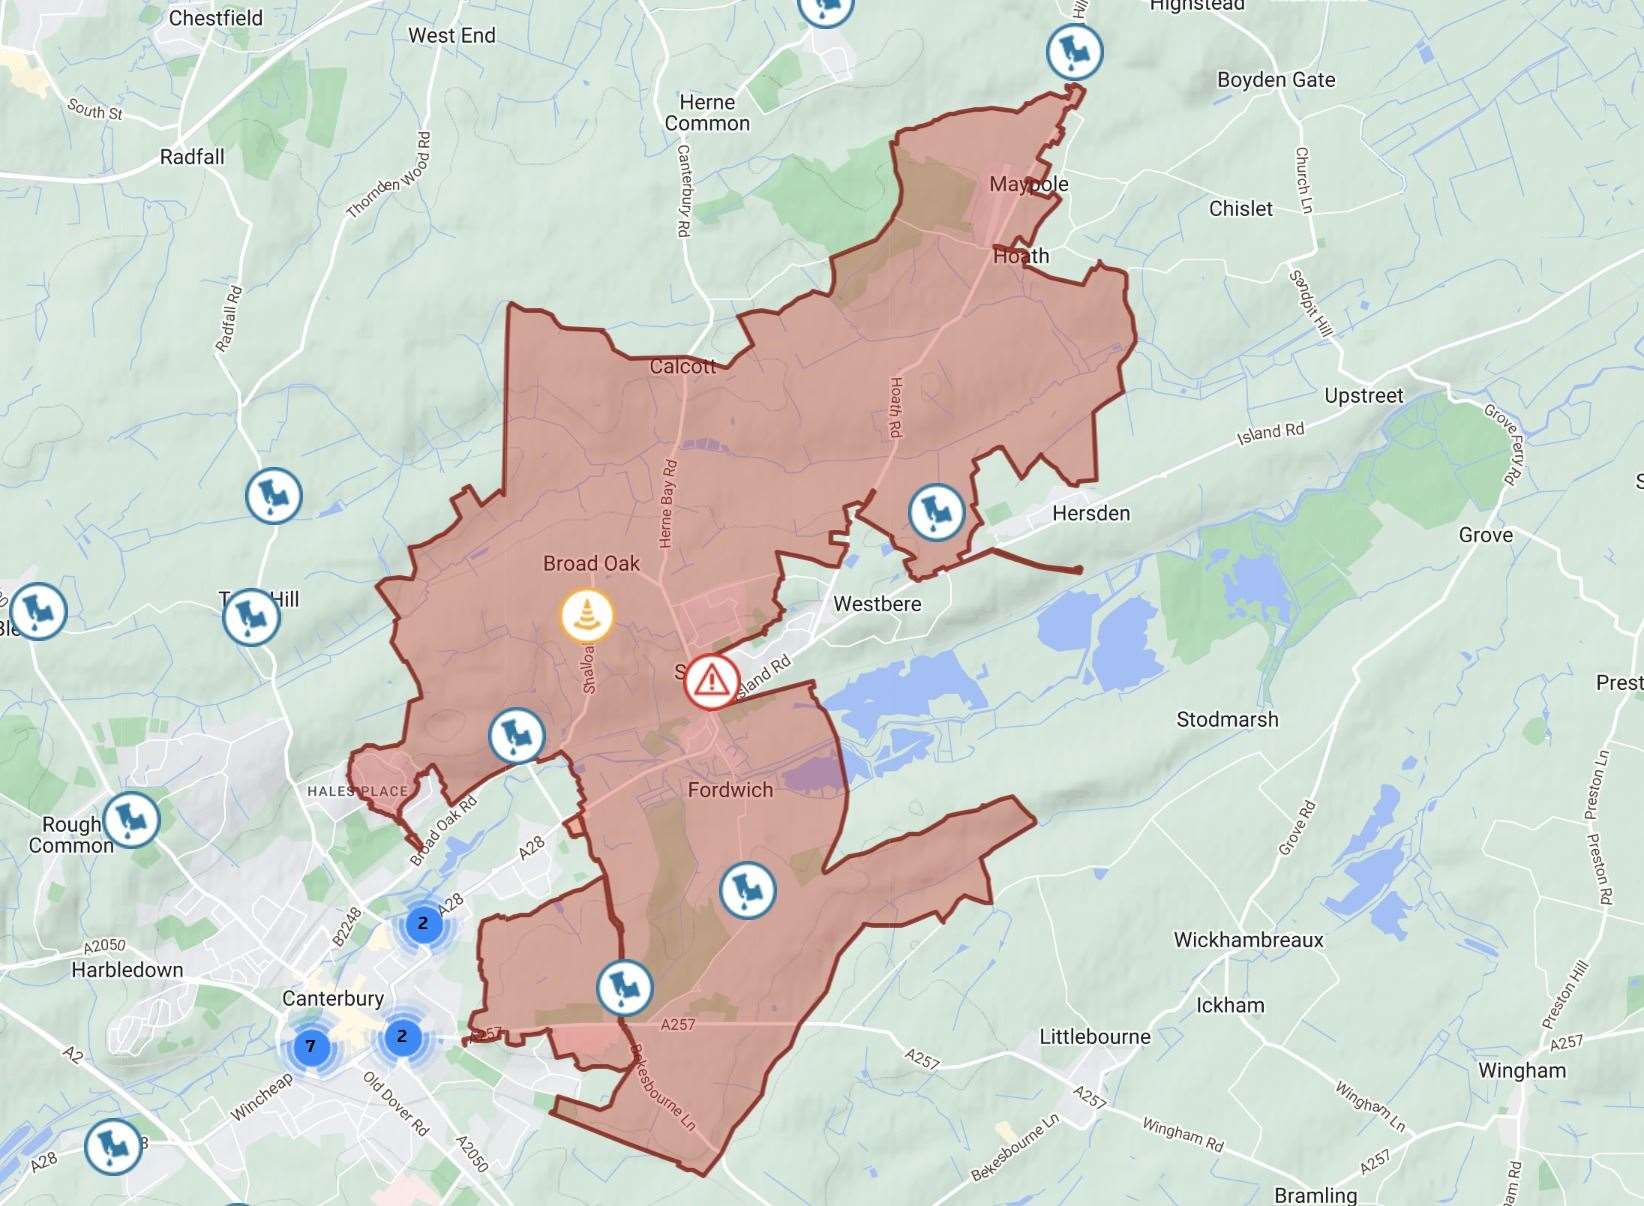 The map showing the areas affected by the burst main in Canterbury